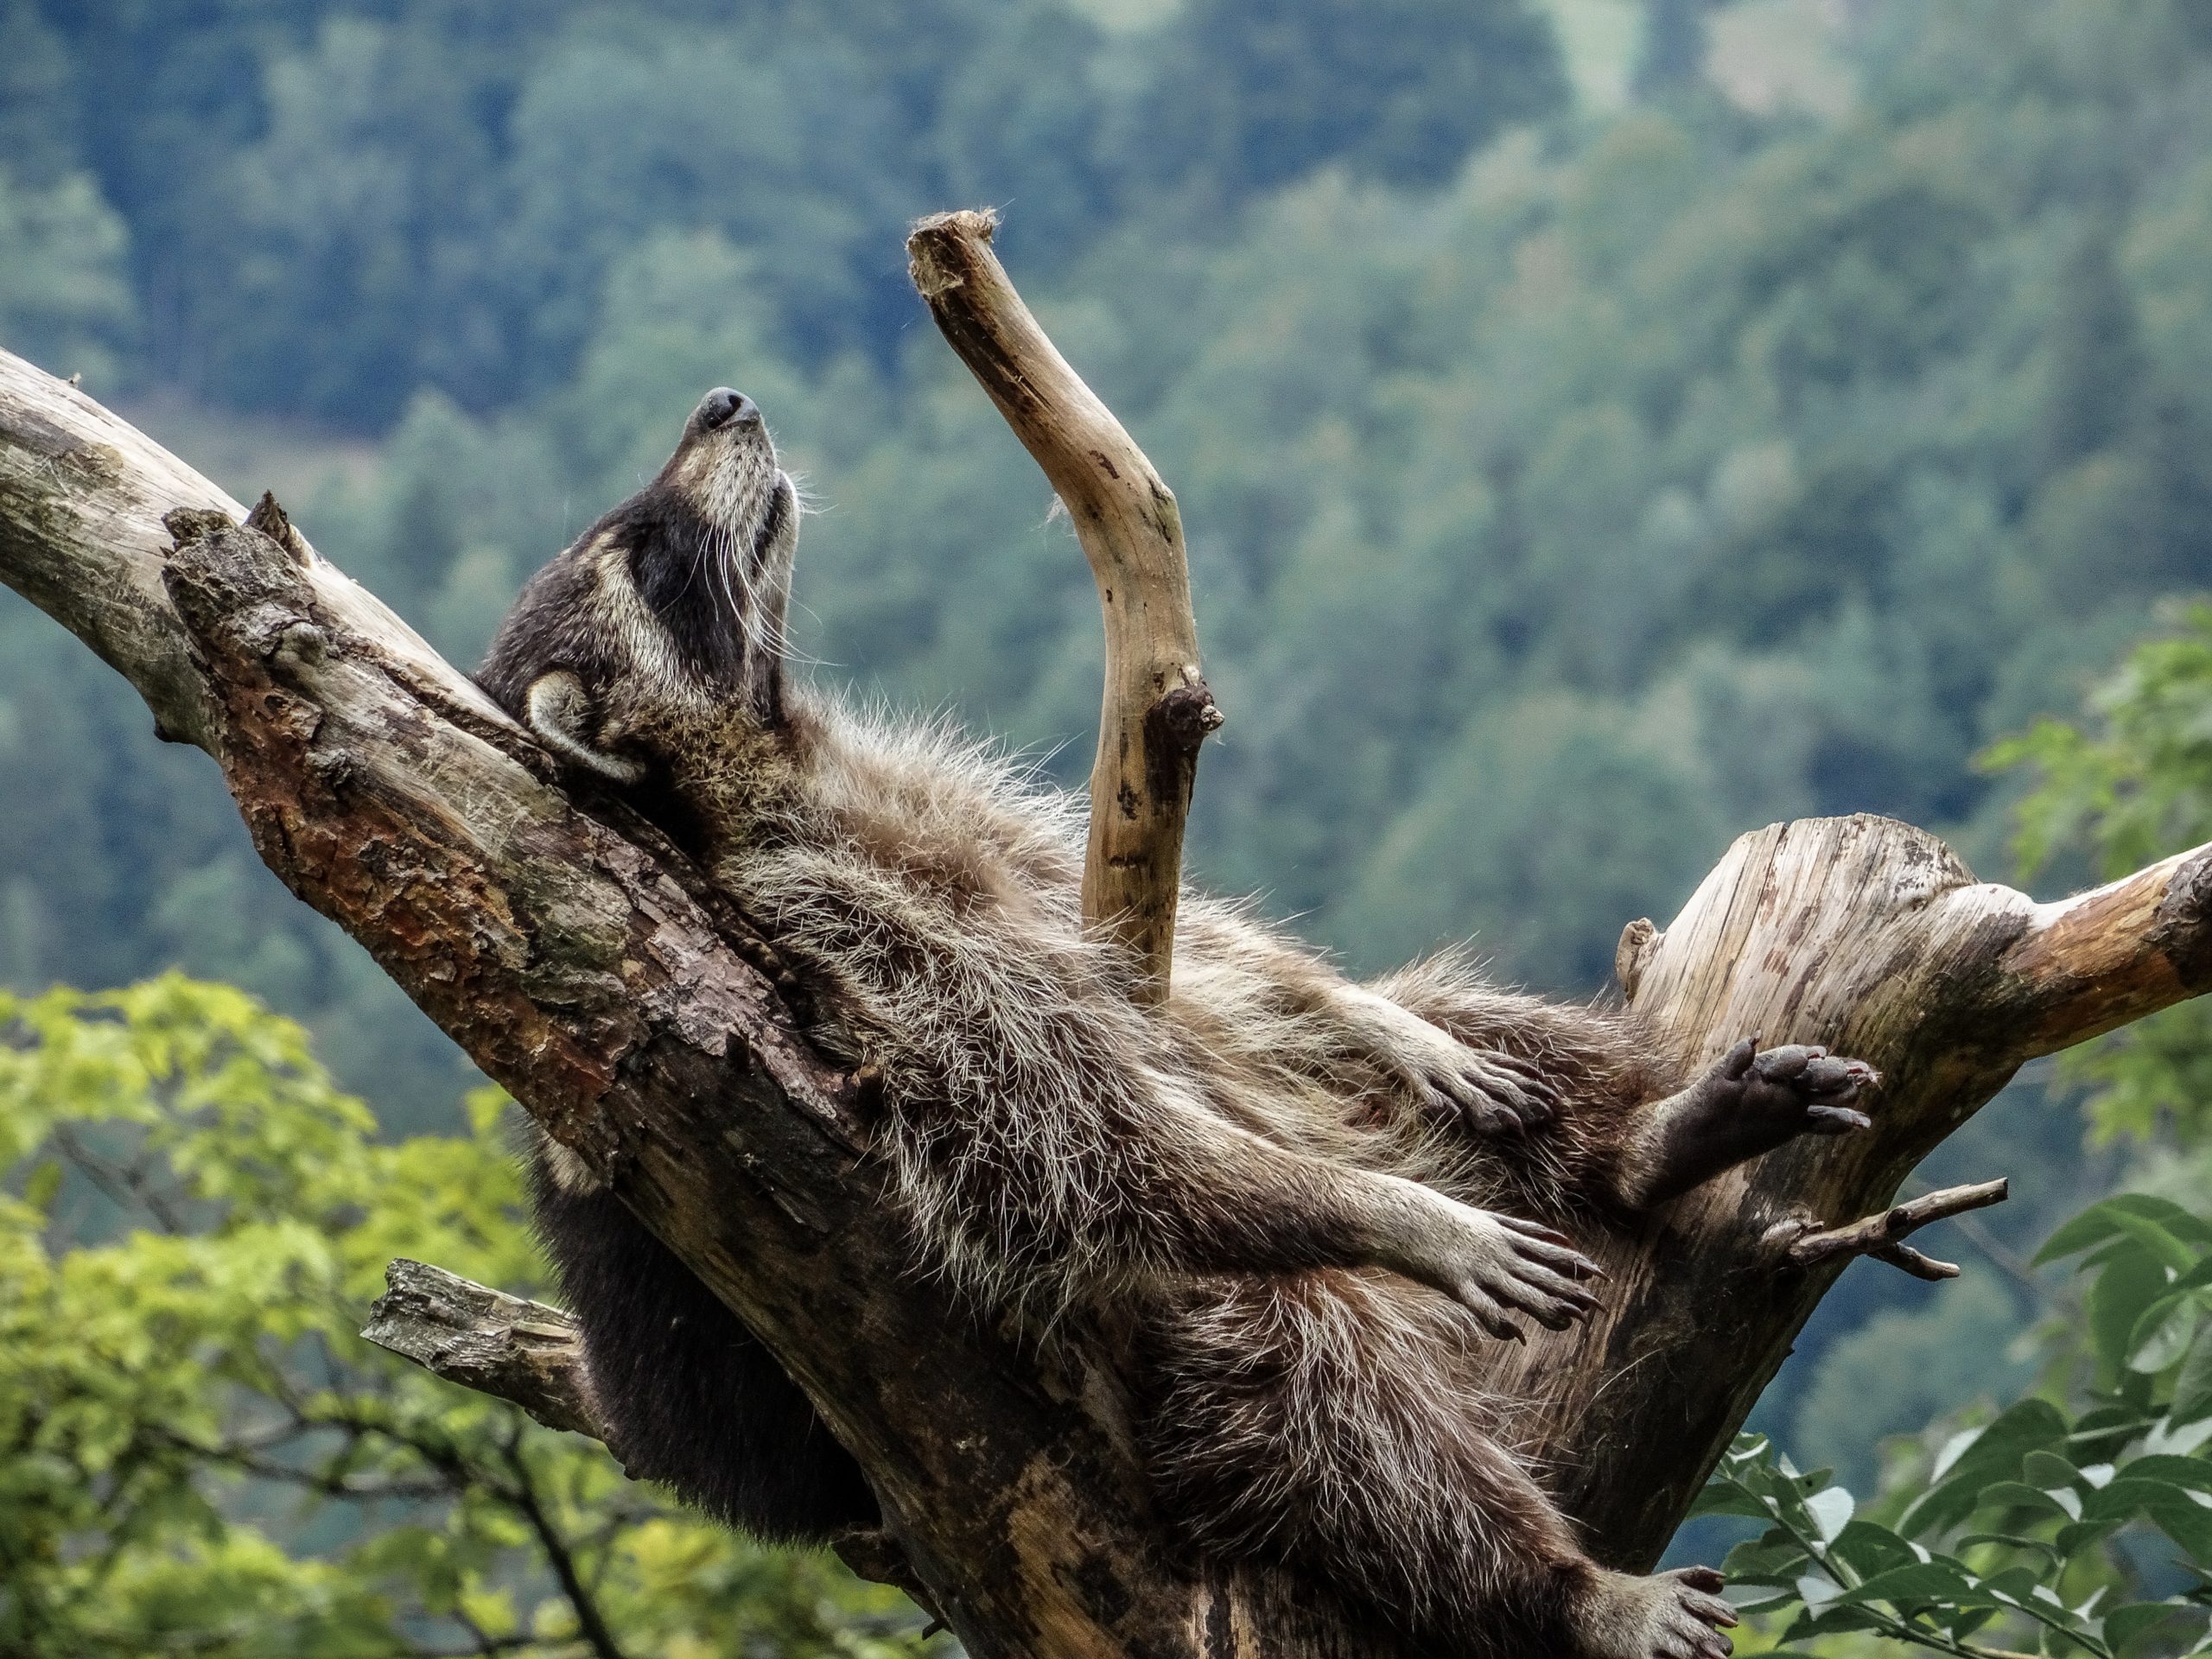 A racoon lounging on a tree branch.